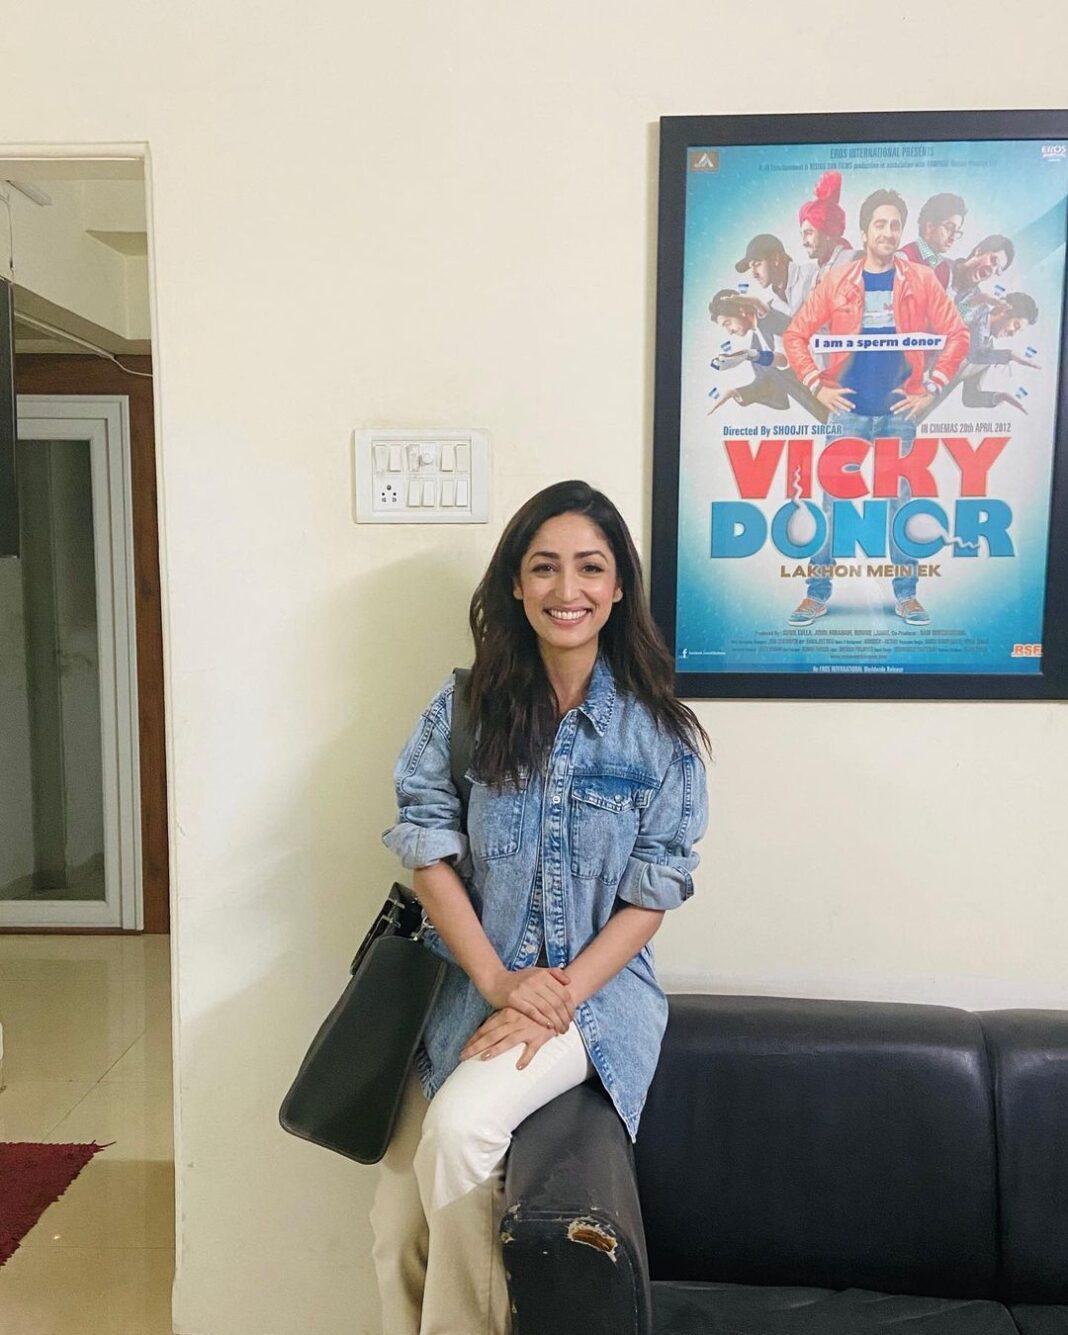 Yami Gautam Instagram - The place where it all began! Started my journey auditioning for Vicky Donor right here ! यह सोफ़ा भी यहीं था ! A recent visit to this studio took me down the memory lane, reliving so many beautiful moments through the journey! Thank you, Shoojit da & our entire team 🌹 #VickyDonor